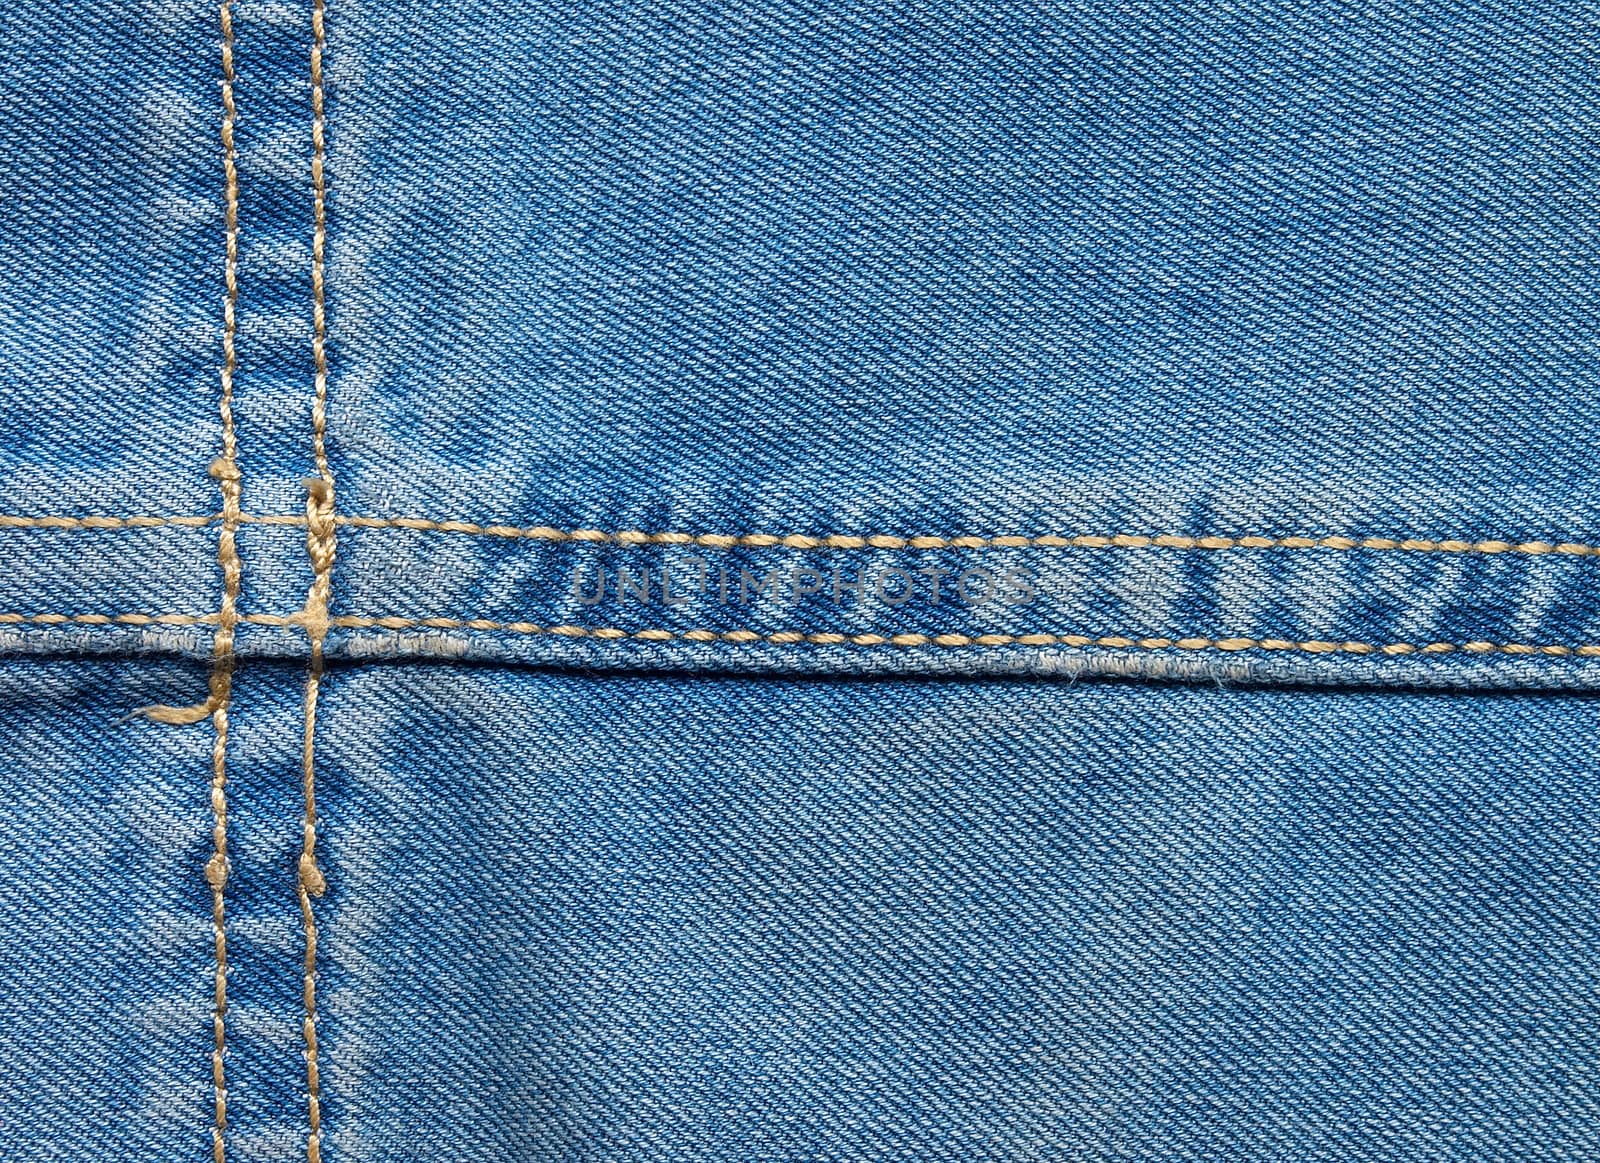 High resolution detail of denim jeans with double-stitched seam.